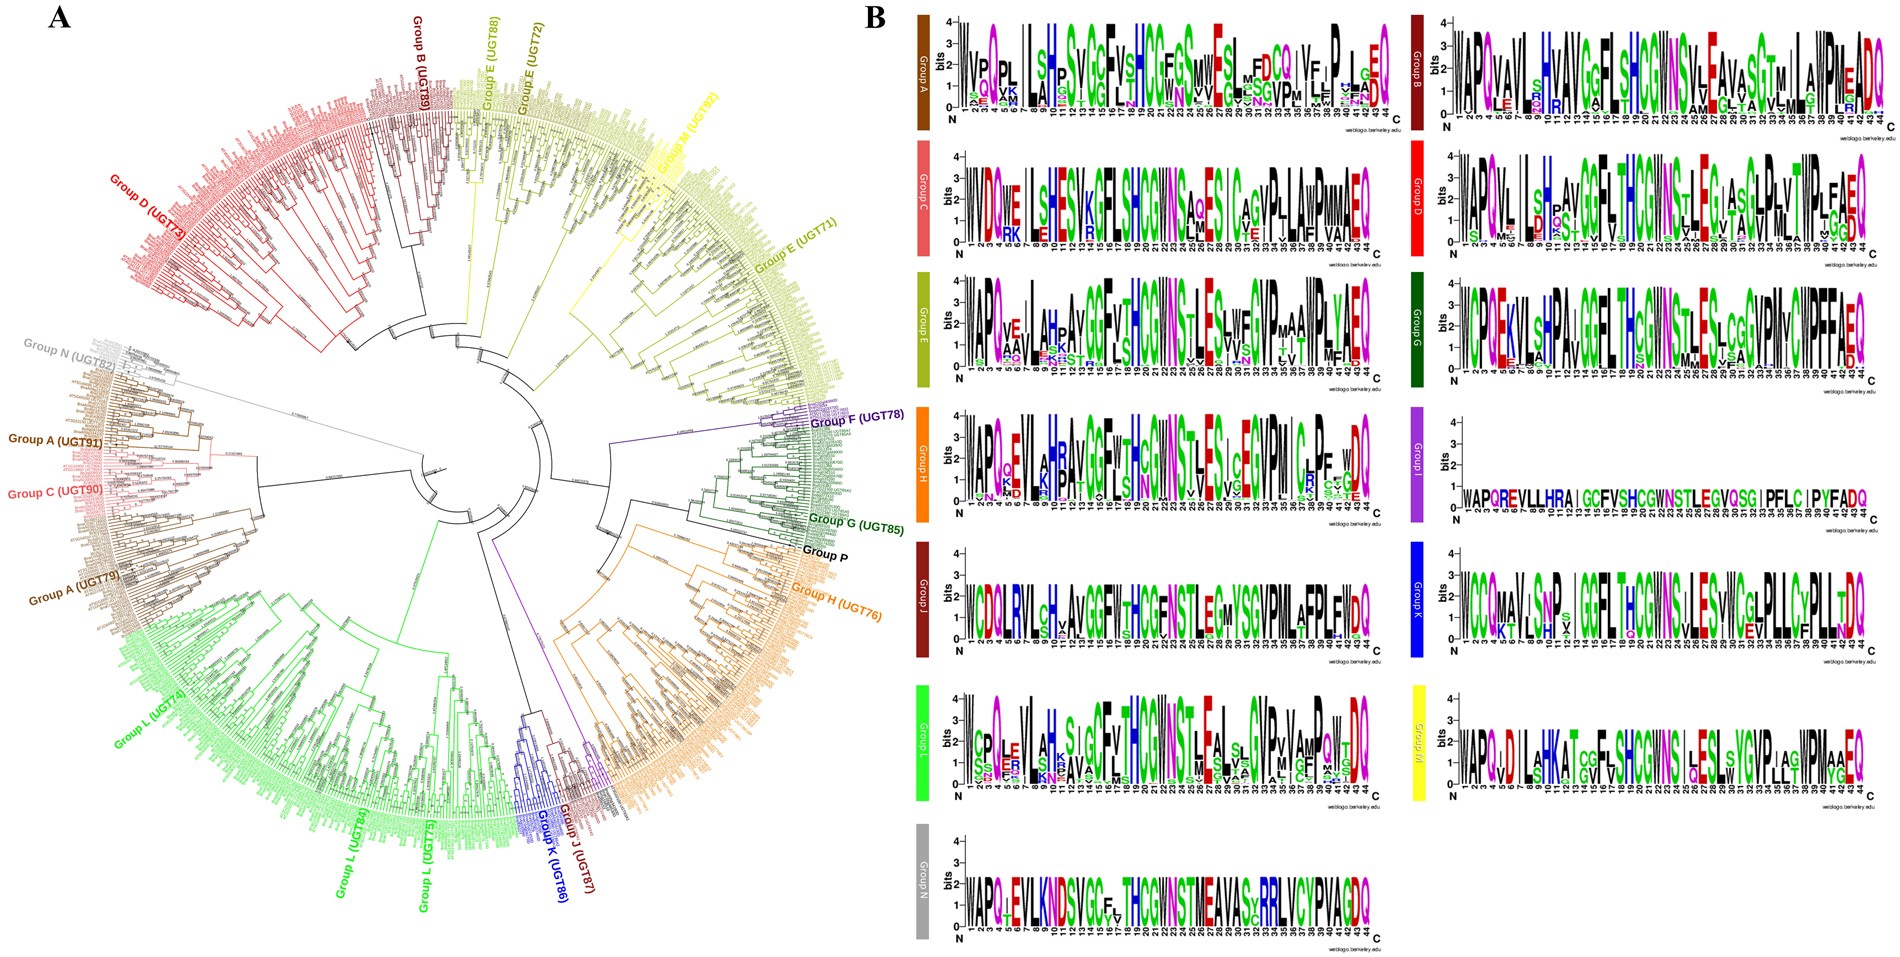 Comparative genomic and transcriptomic analyses of Family-1 UDP  glycosyltransferase in three Brassica species and Arabidopsis indicates  stress-responsive regulation | Scientific Reports